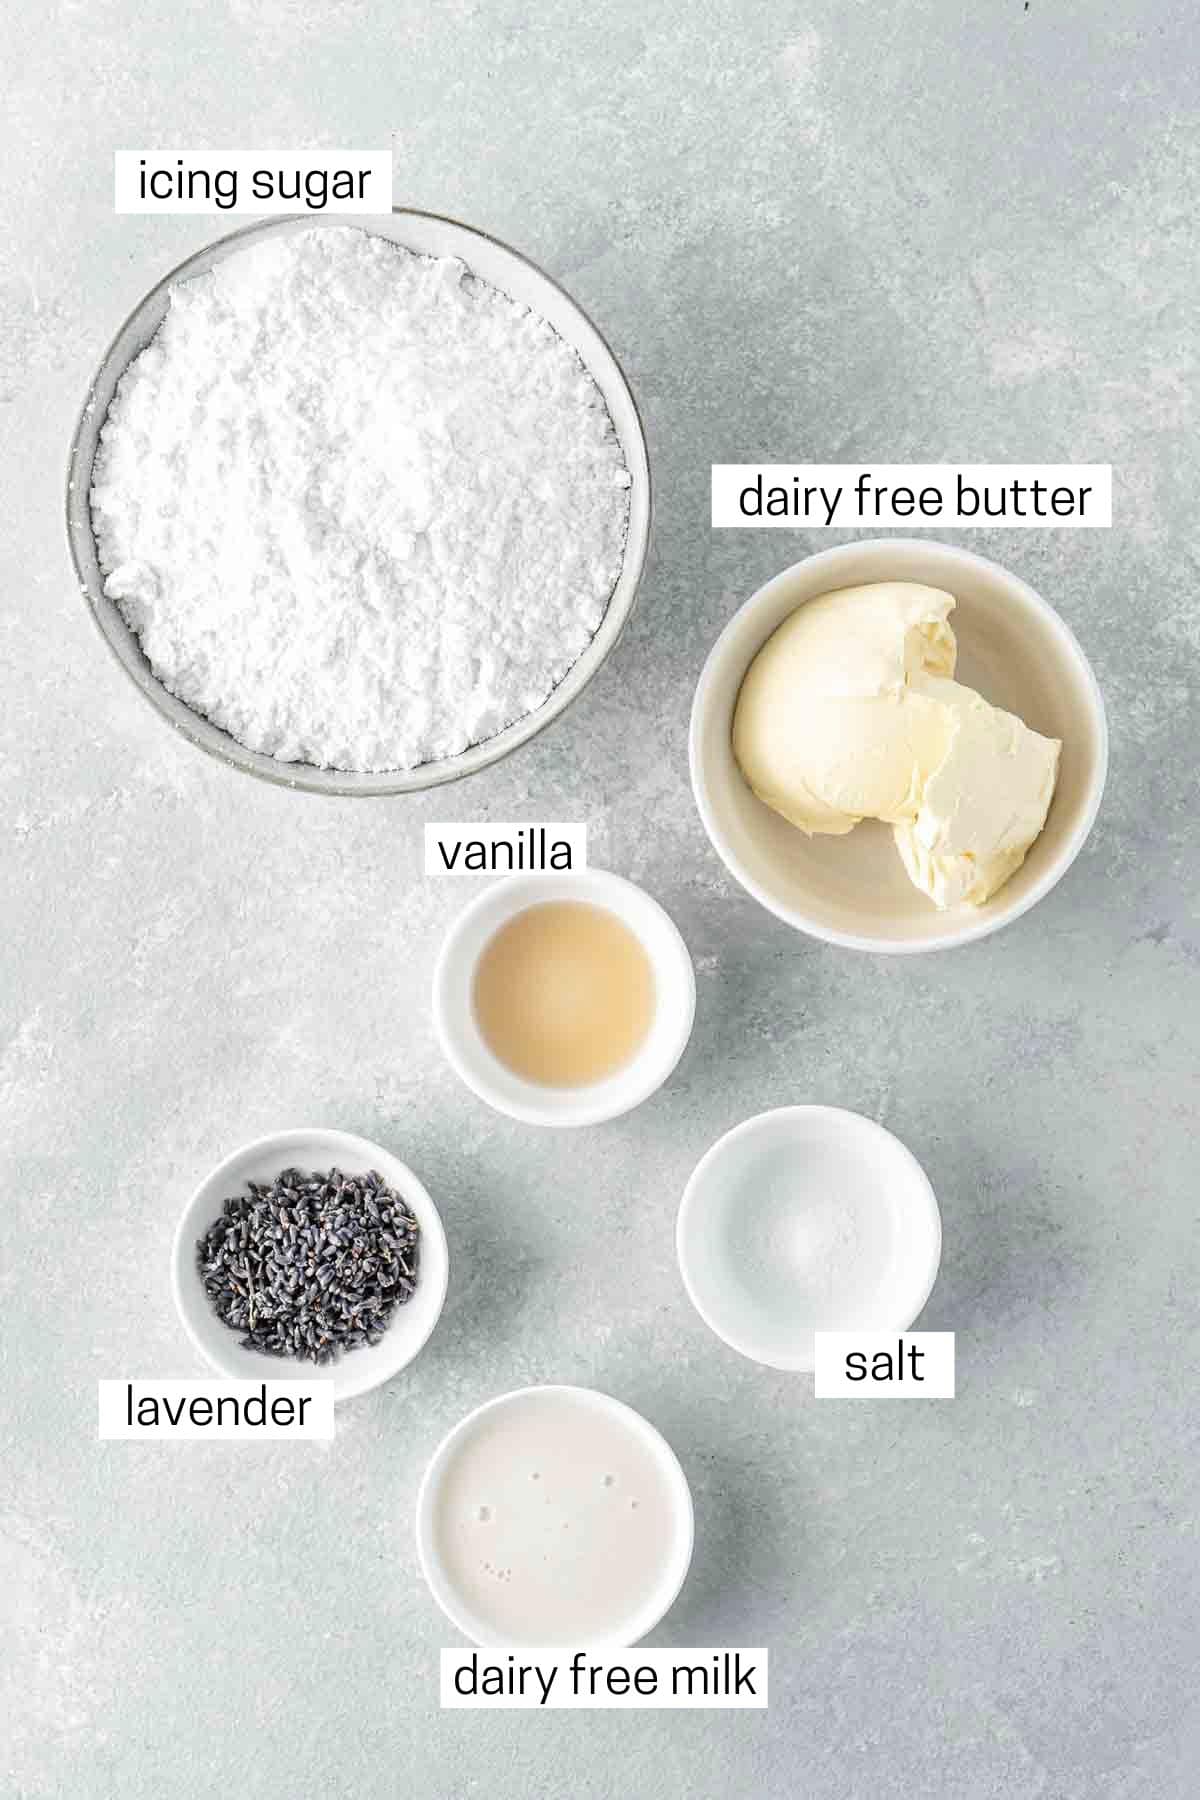 All ingredients needed for lavender buttercream laid out in small bowls.